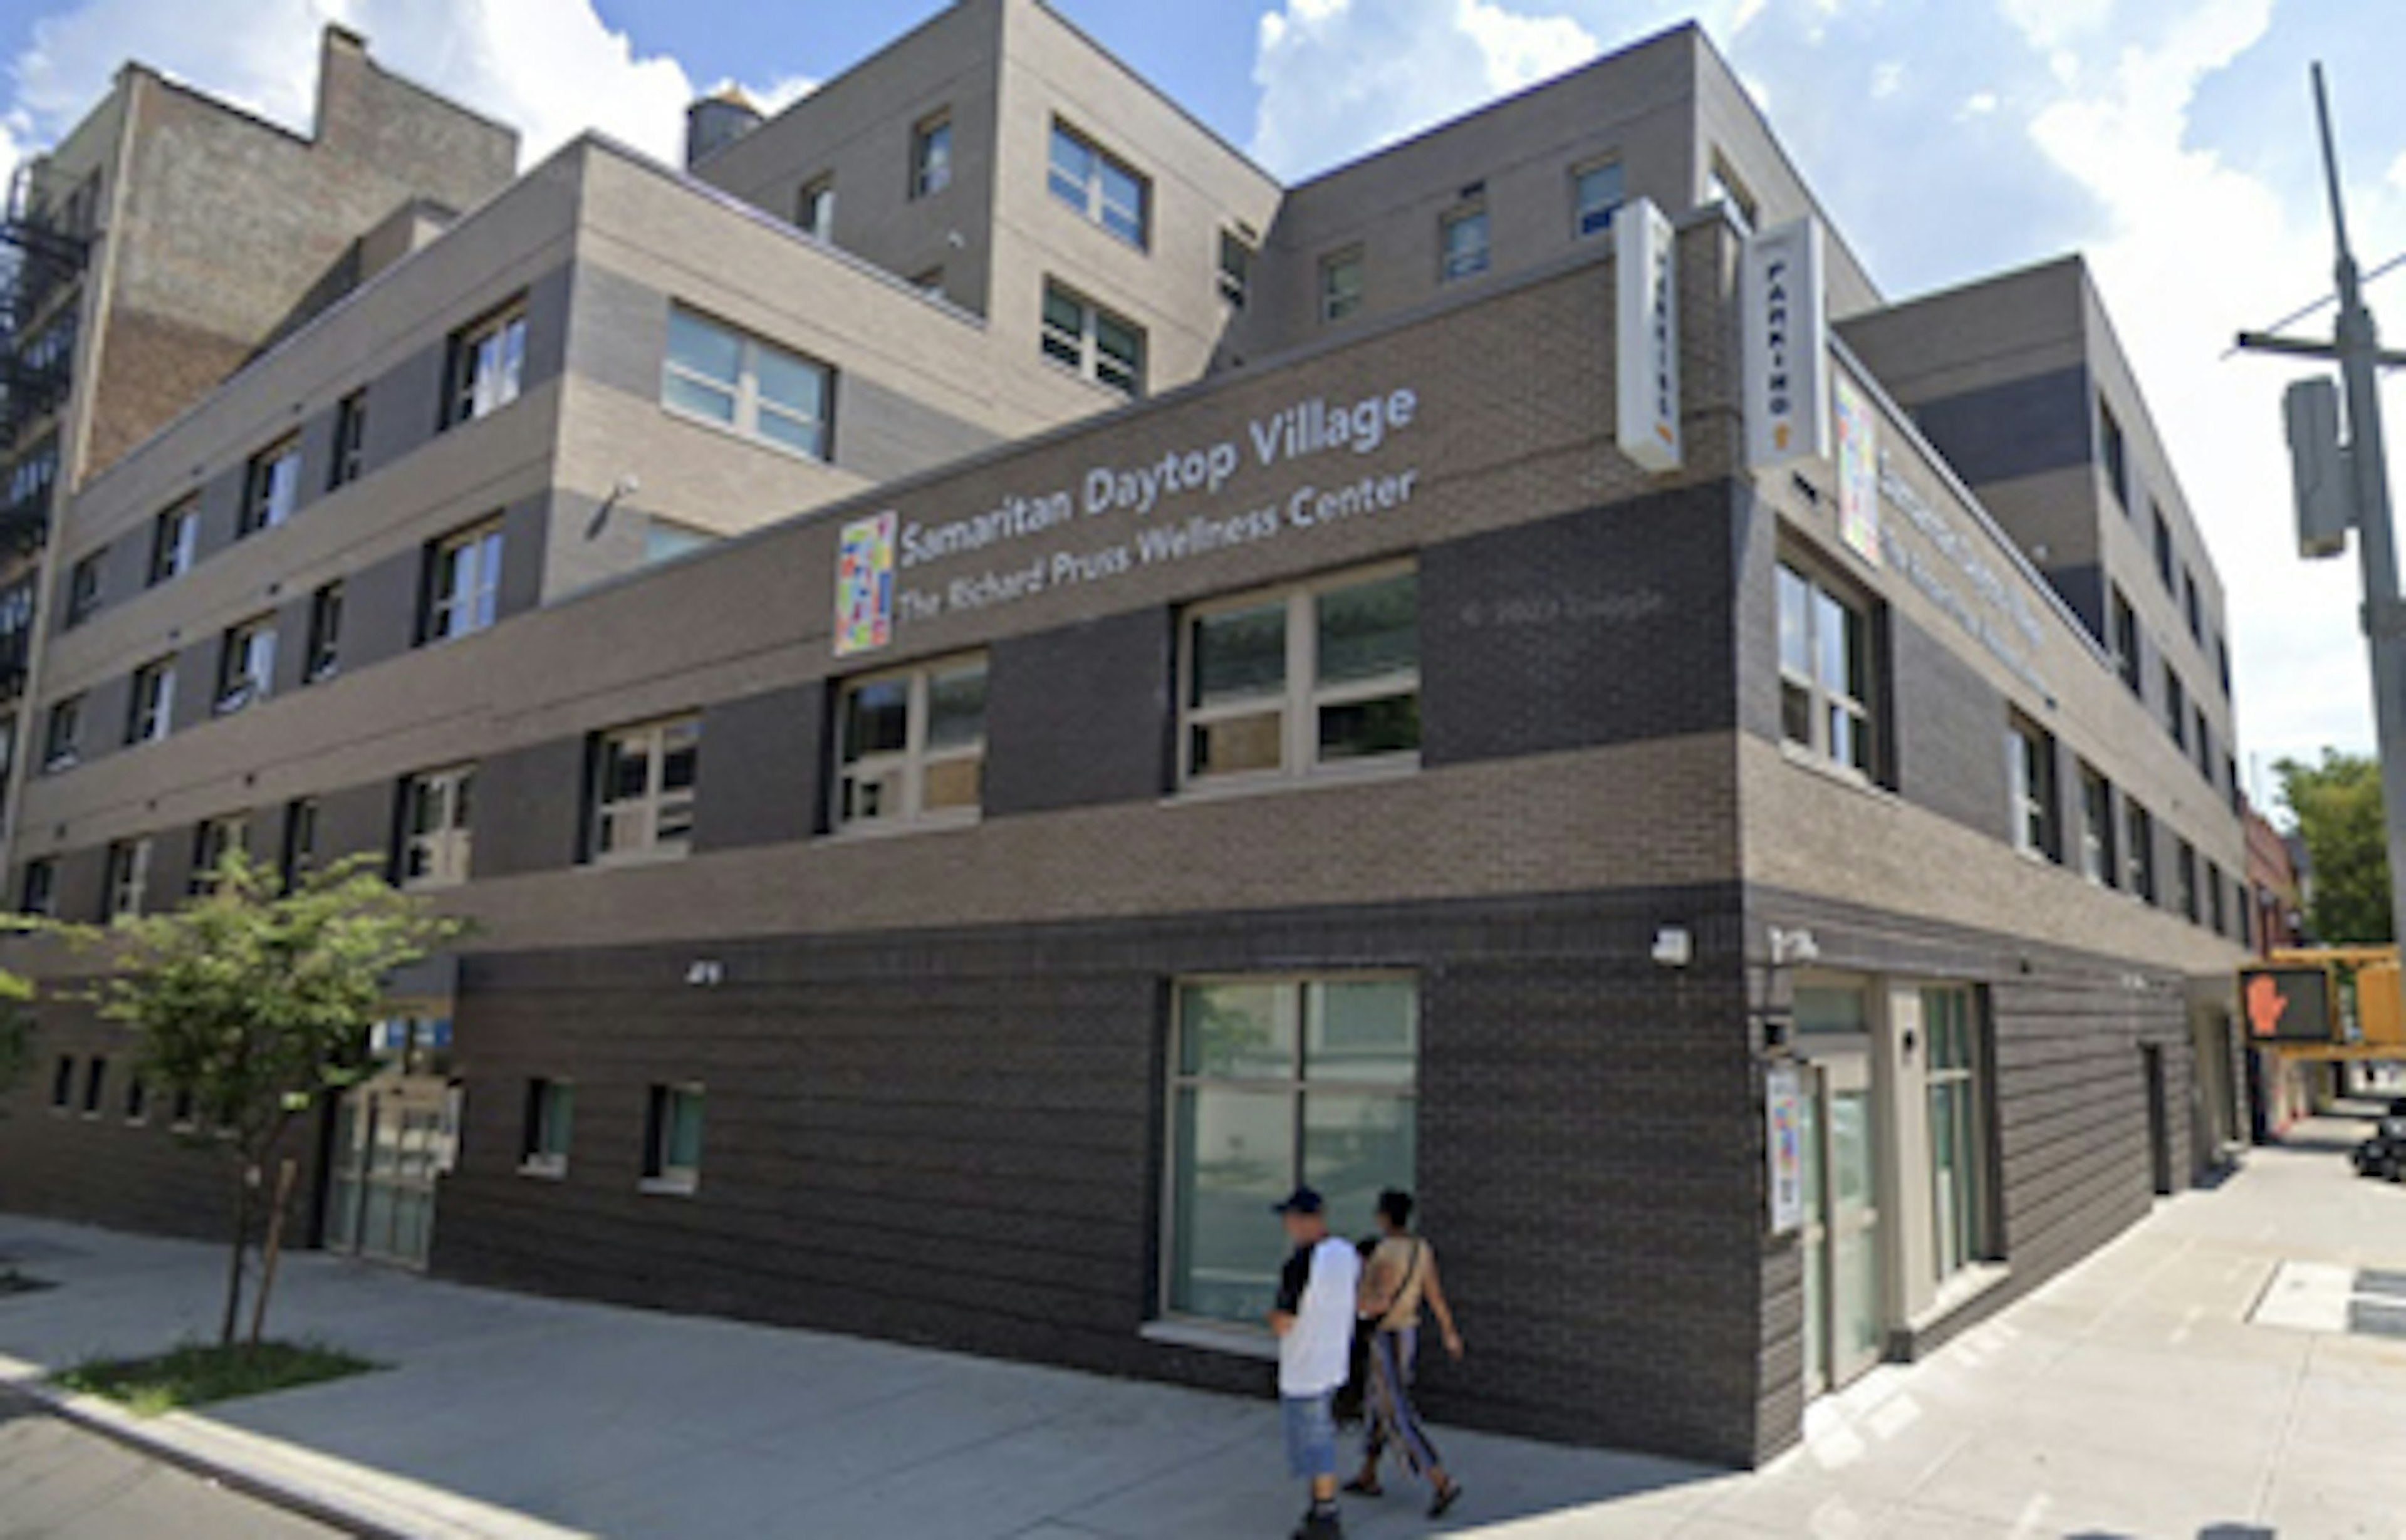 Manatus Refis New Bronx Community Center Project With $38M Barclays Loan